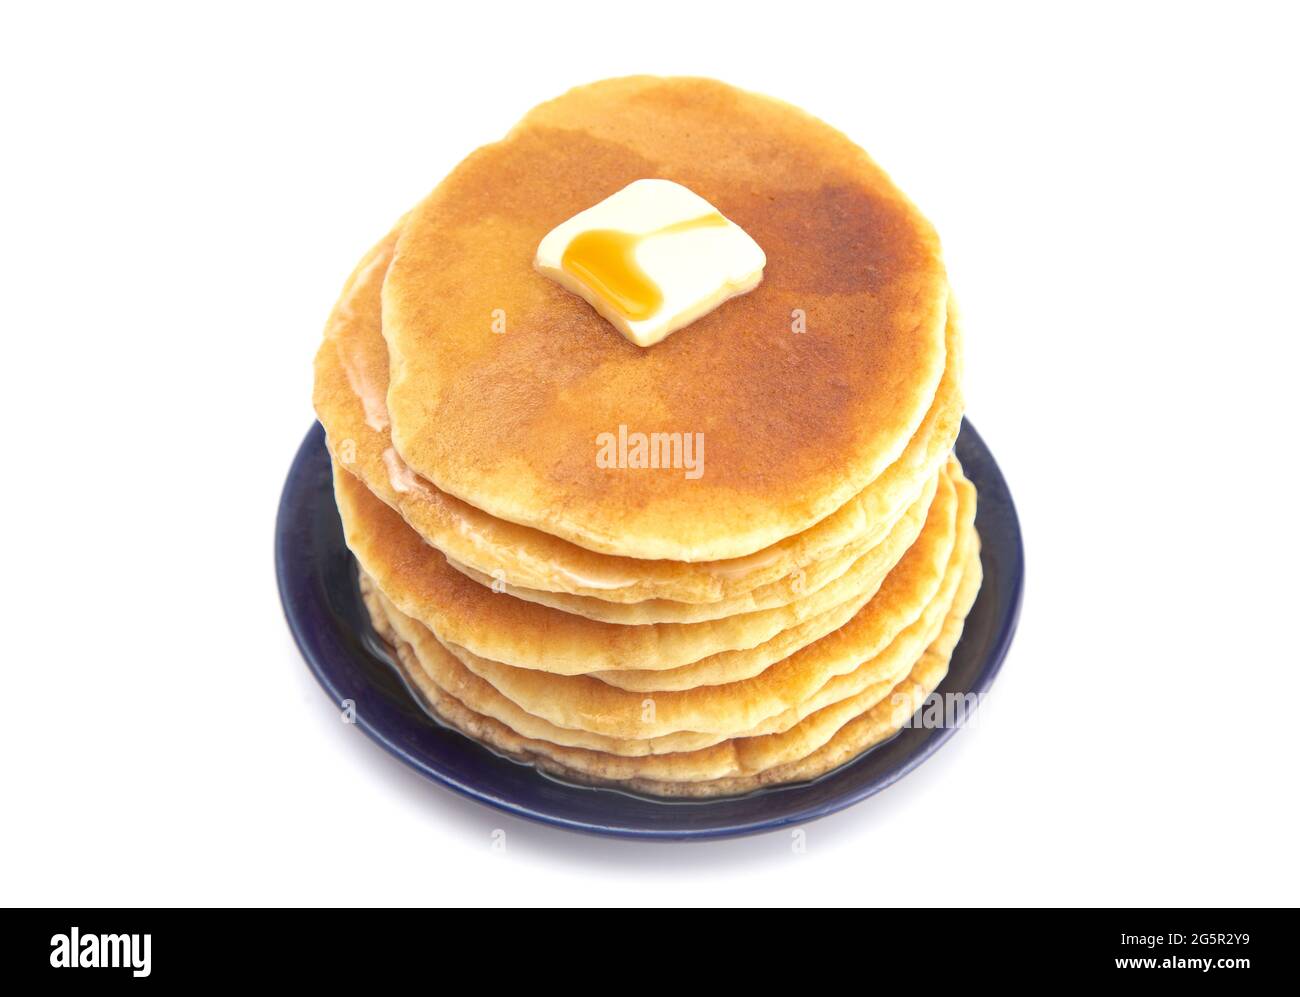 pancakes Images & Stock Style Alamy Out Cut Pictures -